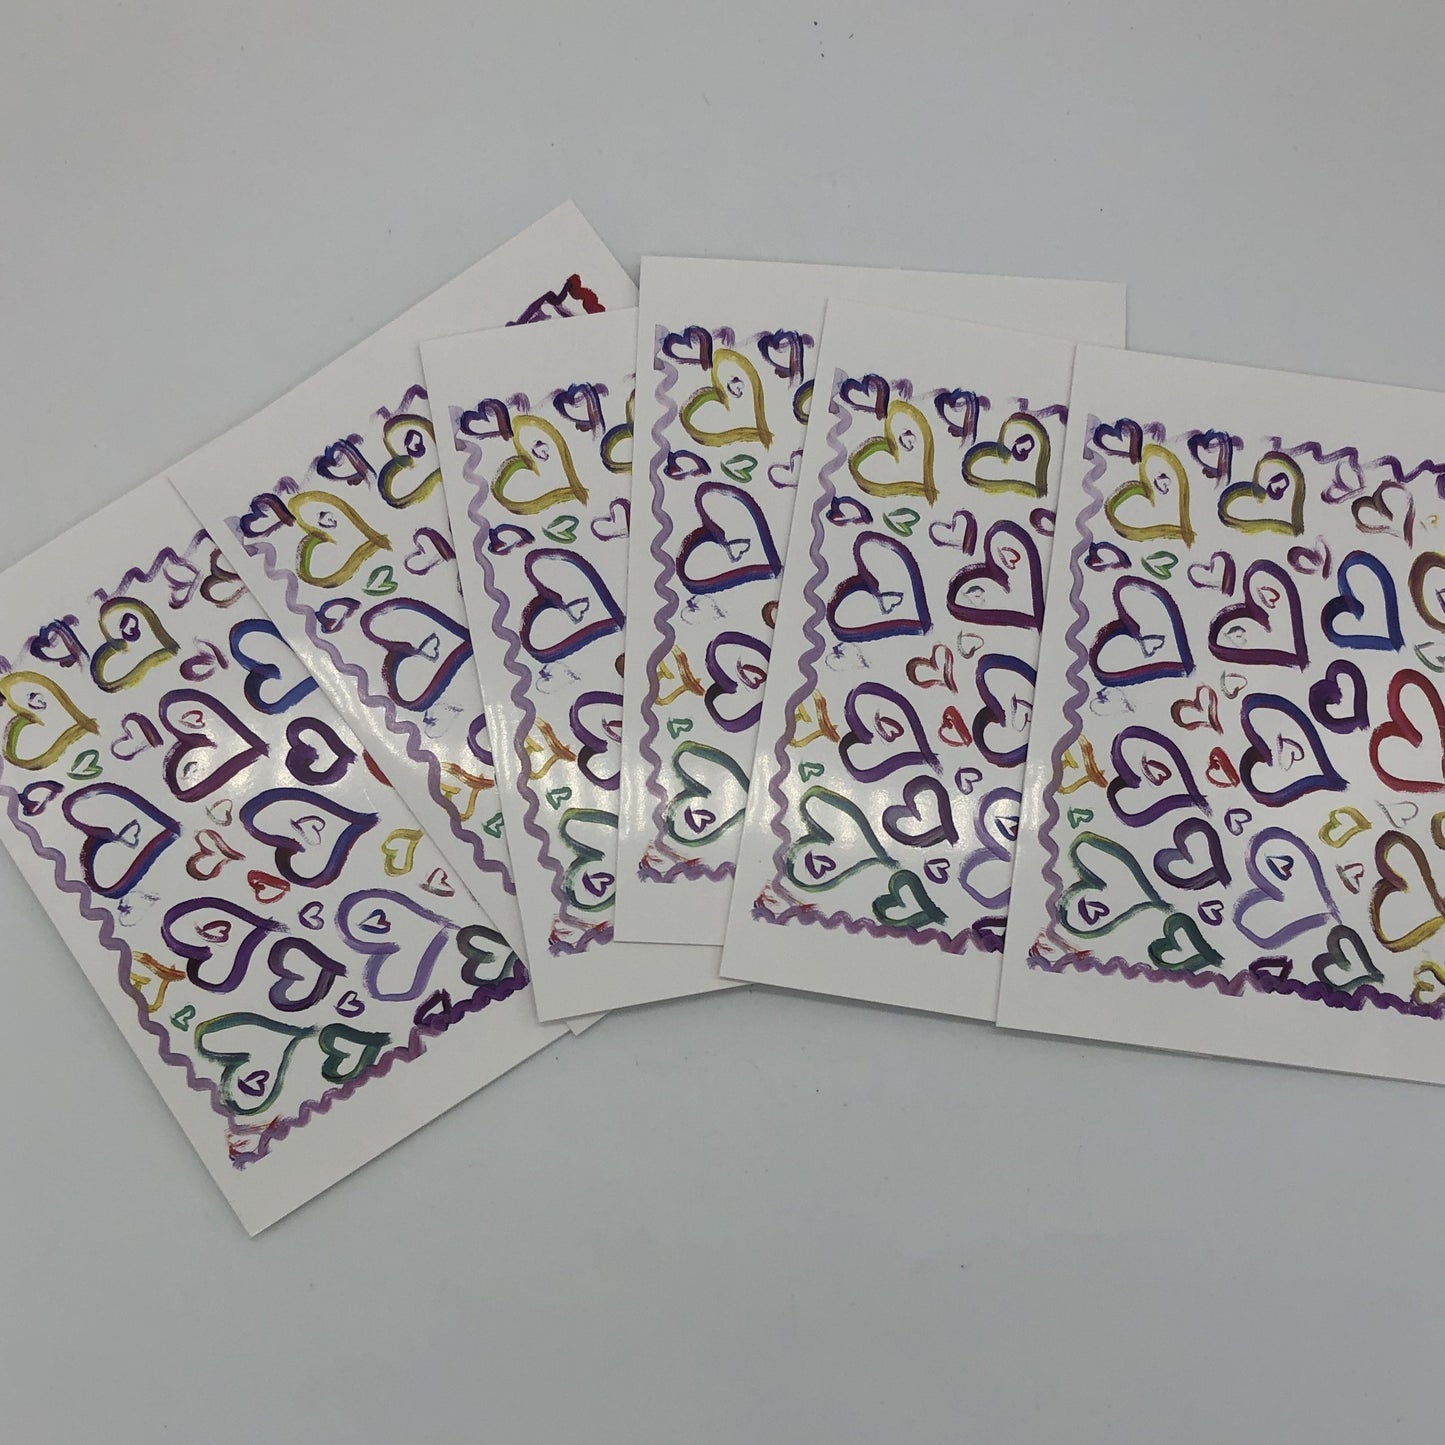 Six of the "Hearts" greeting cards fanned out. White greeting card with about a dozen large water colored hearts in blues, purples, and yellows. There are several smaller hearts of varying sizes all around those larger hearts and a squiggly line in shades of purple and red framing all of it.